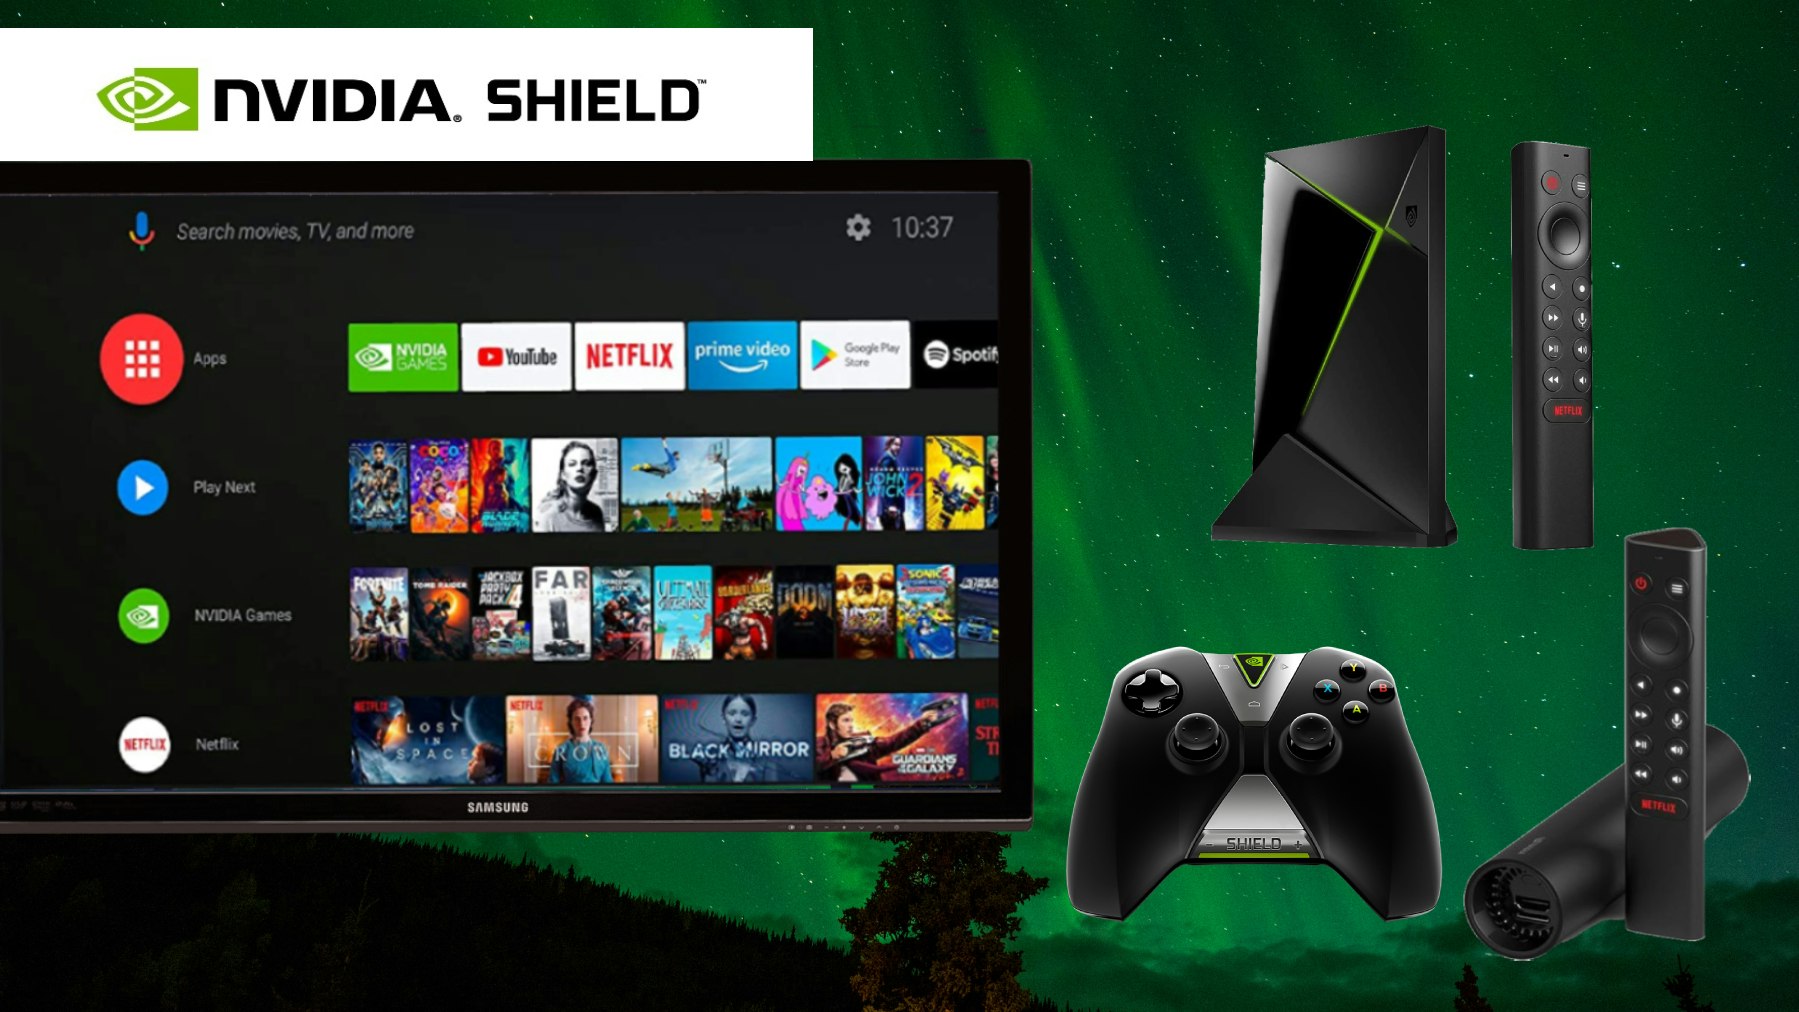 What is NVIDIA Shield?